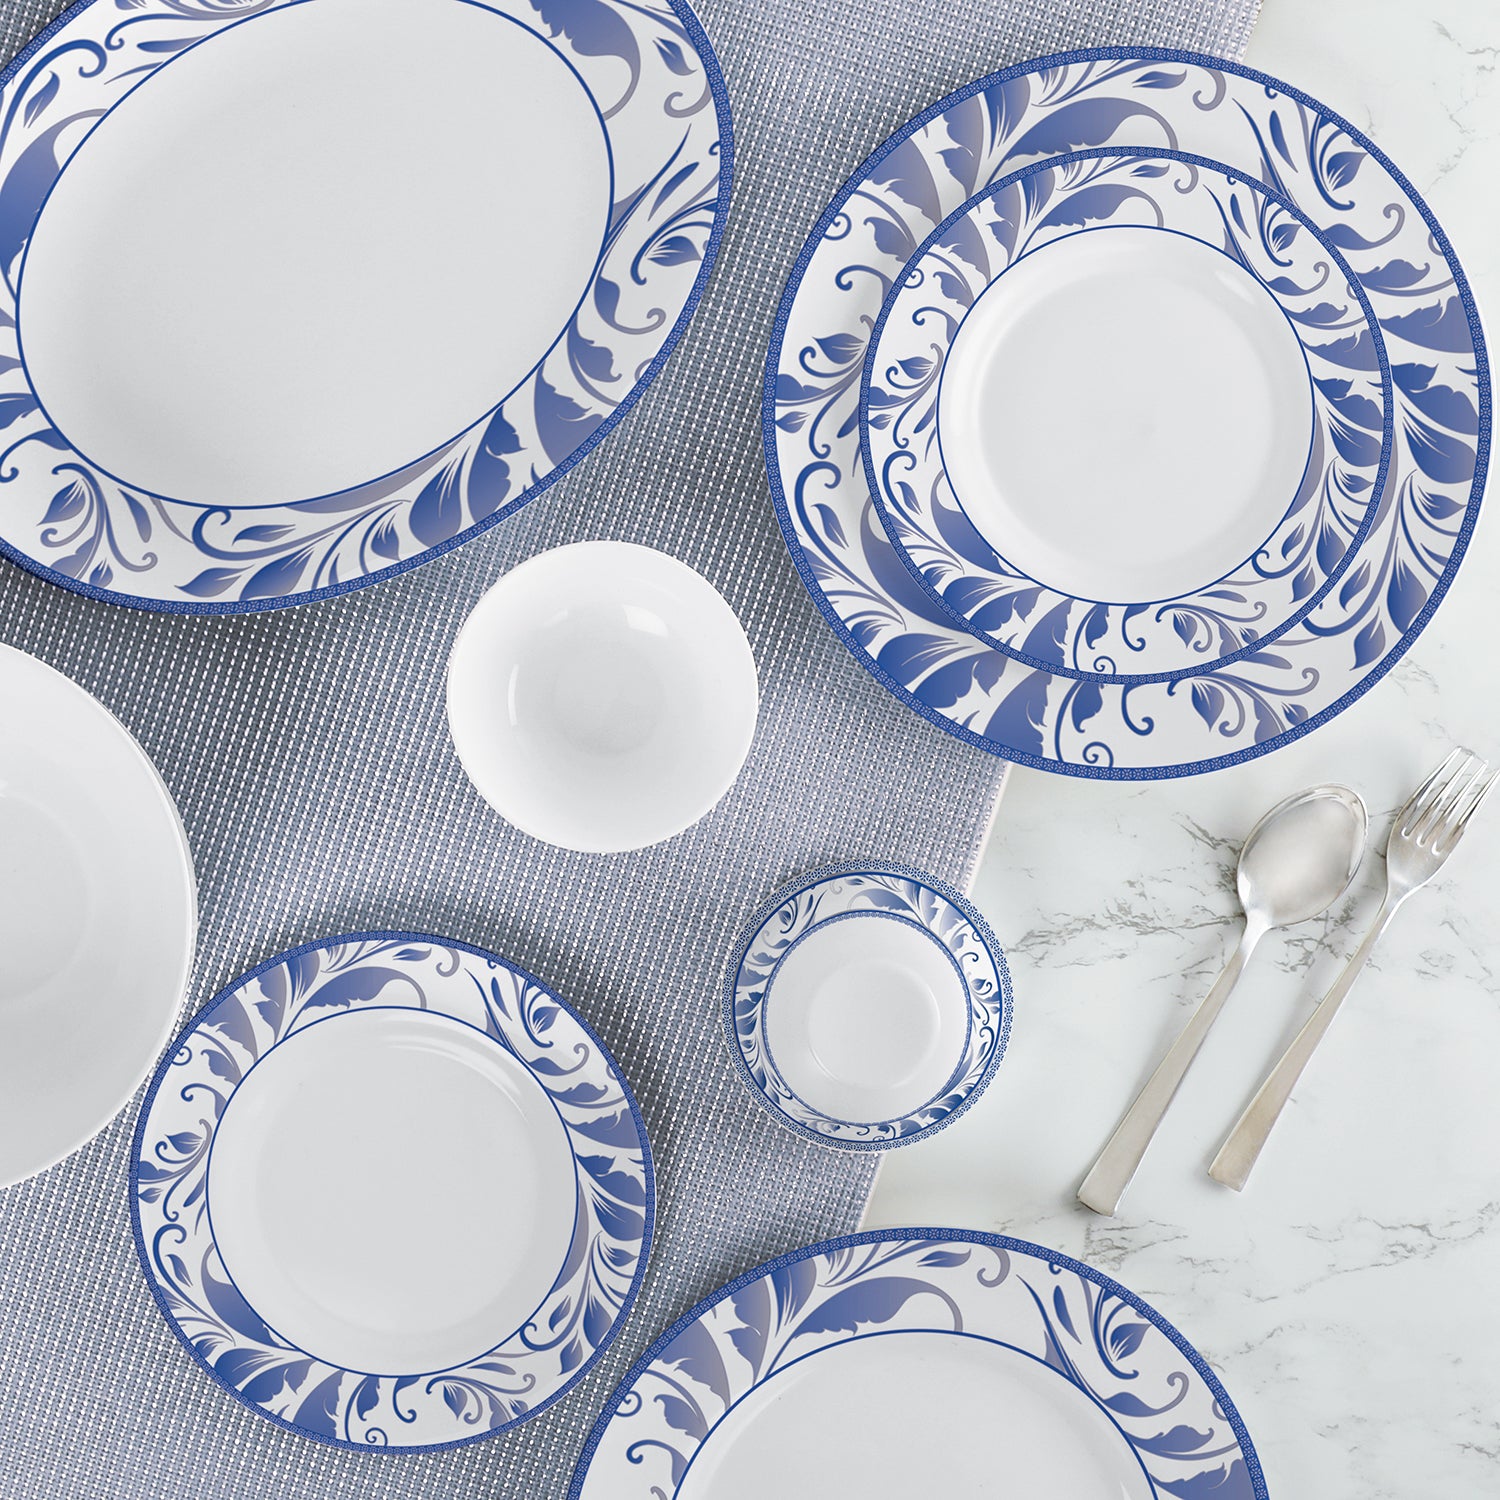 Ariana Series 27 Pieces Opalware Dinner Set for Family of 6 Blue Ocean